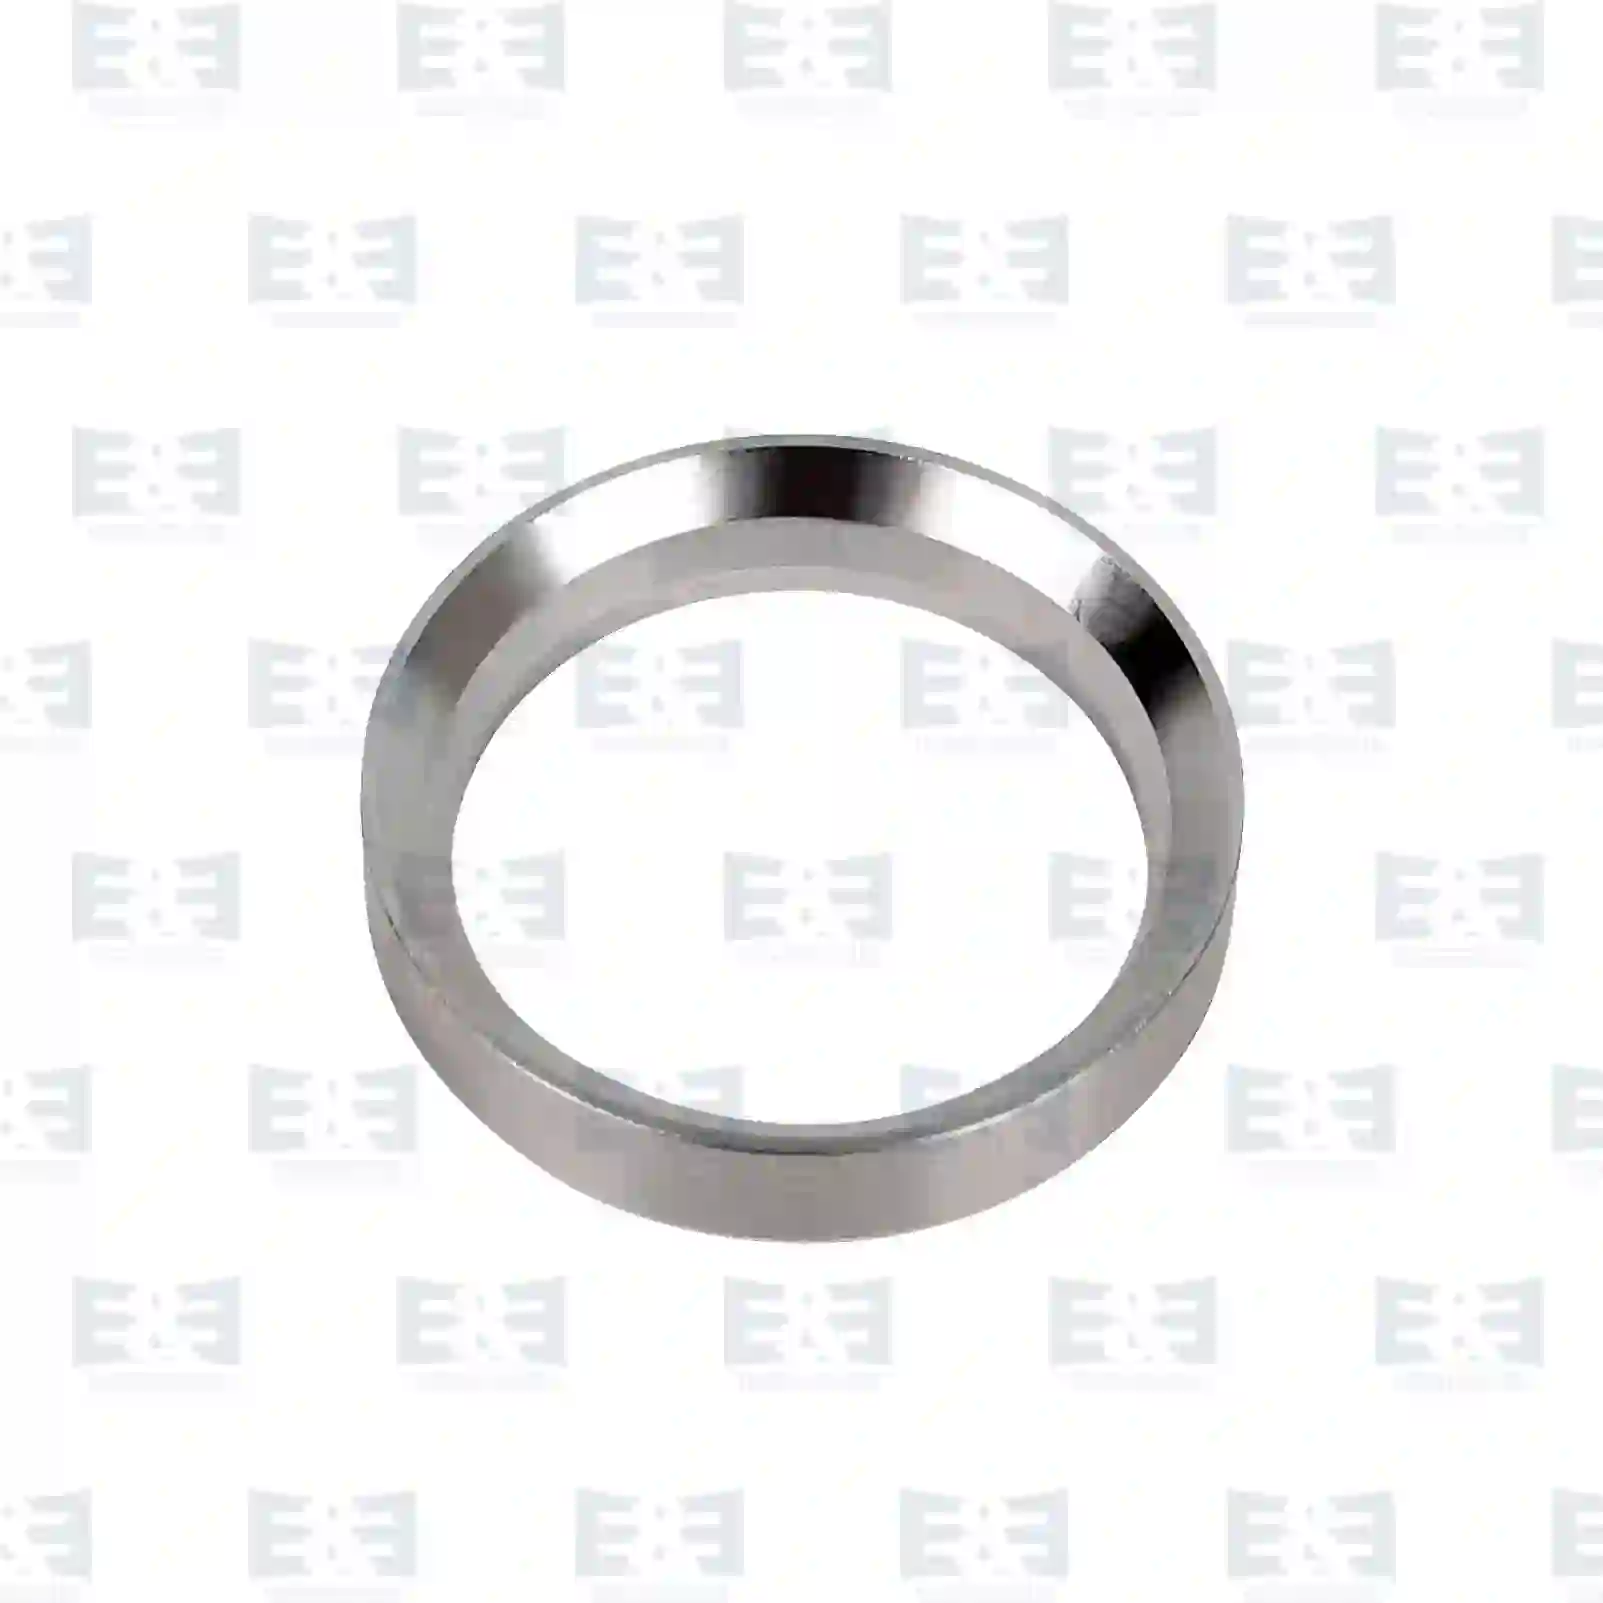  Valve seat ring, exhaust || E&E Truck Spare Parts | Truck Spare Parts, Auotomotive Spare Parts